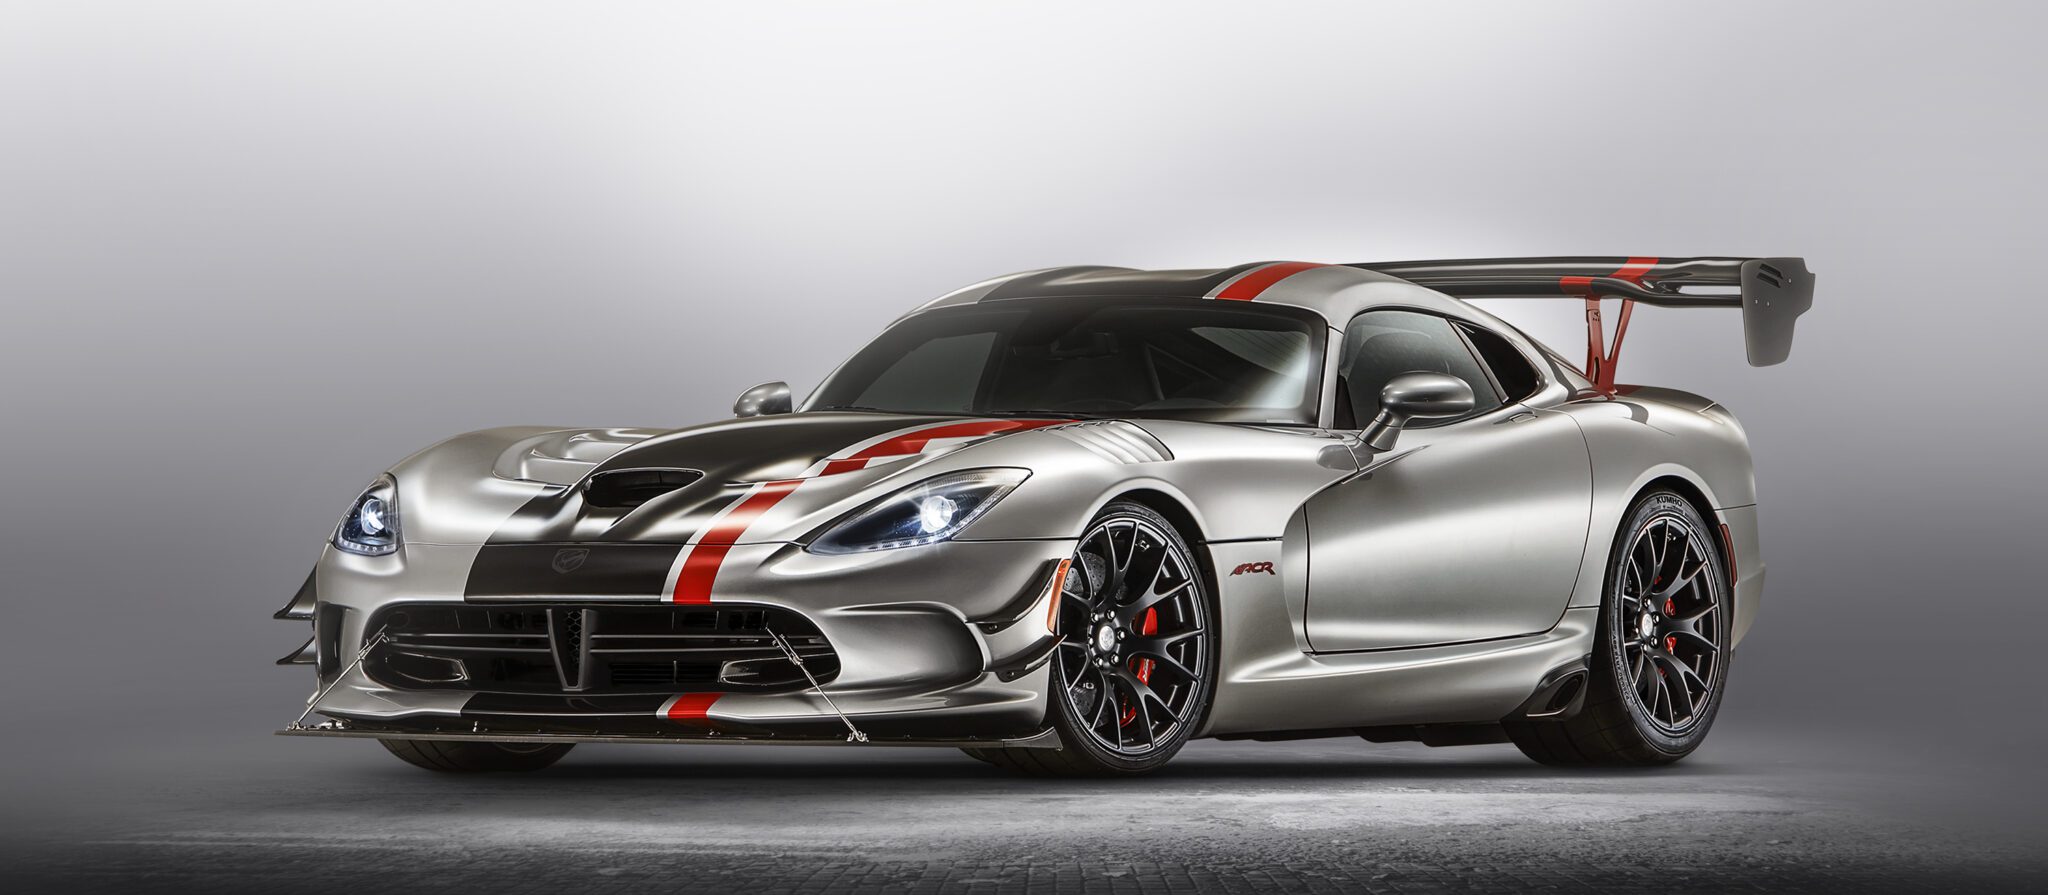 2017 Dodge Viper ACR with Extreme Aero package.